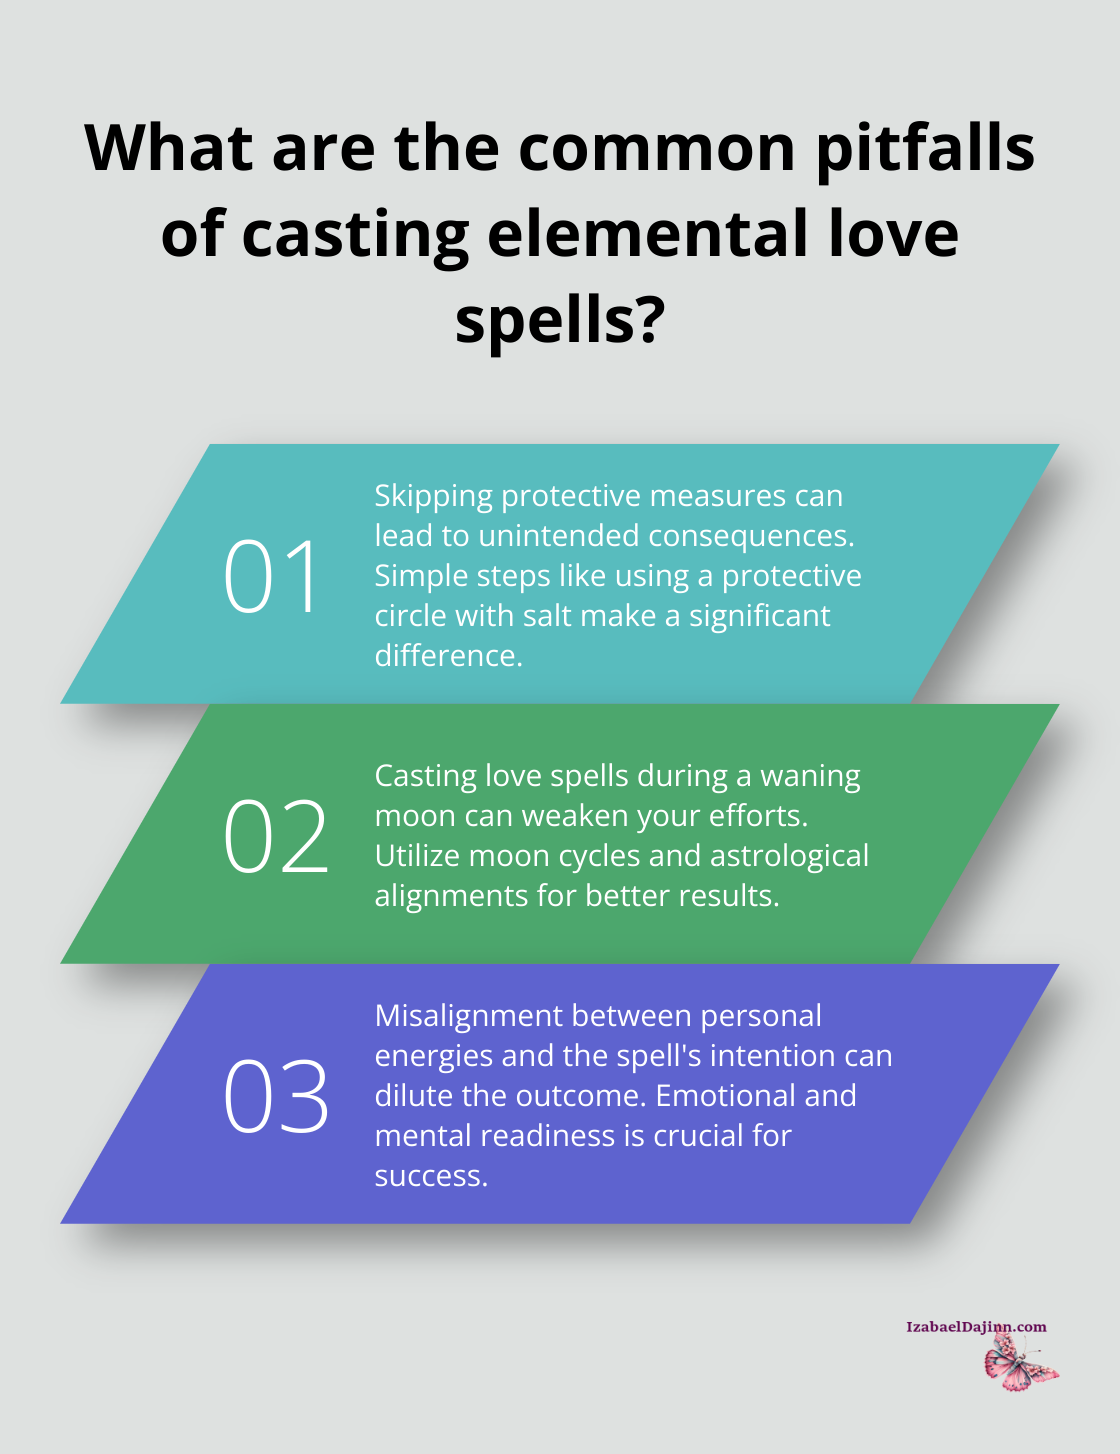 Fact - What are the common pitfalls of casting elemental love spells?